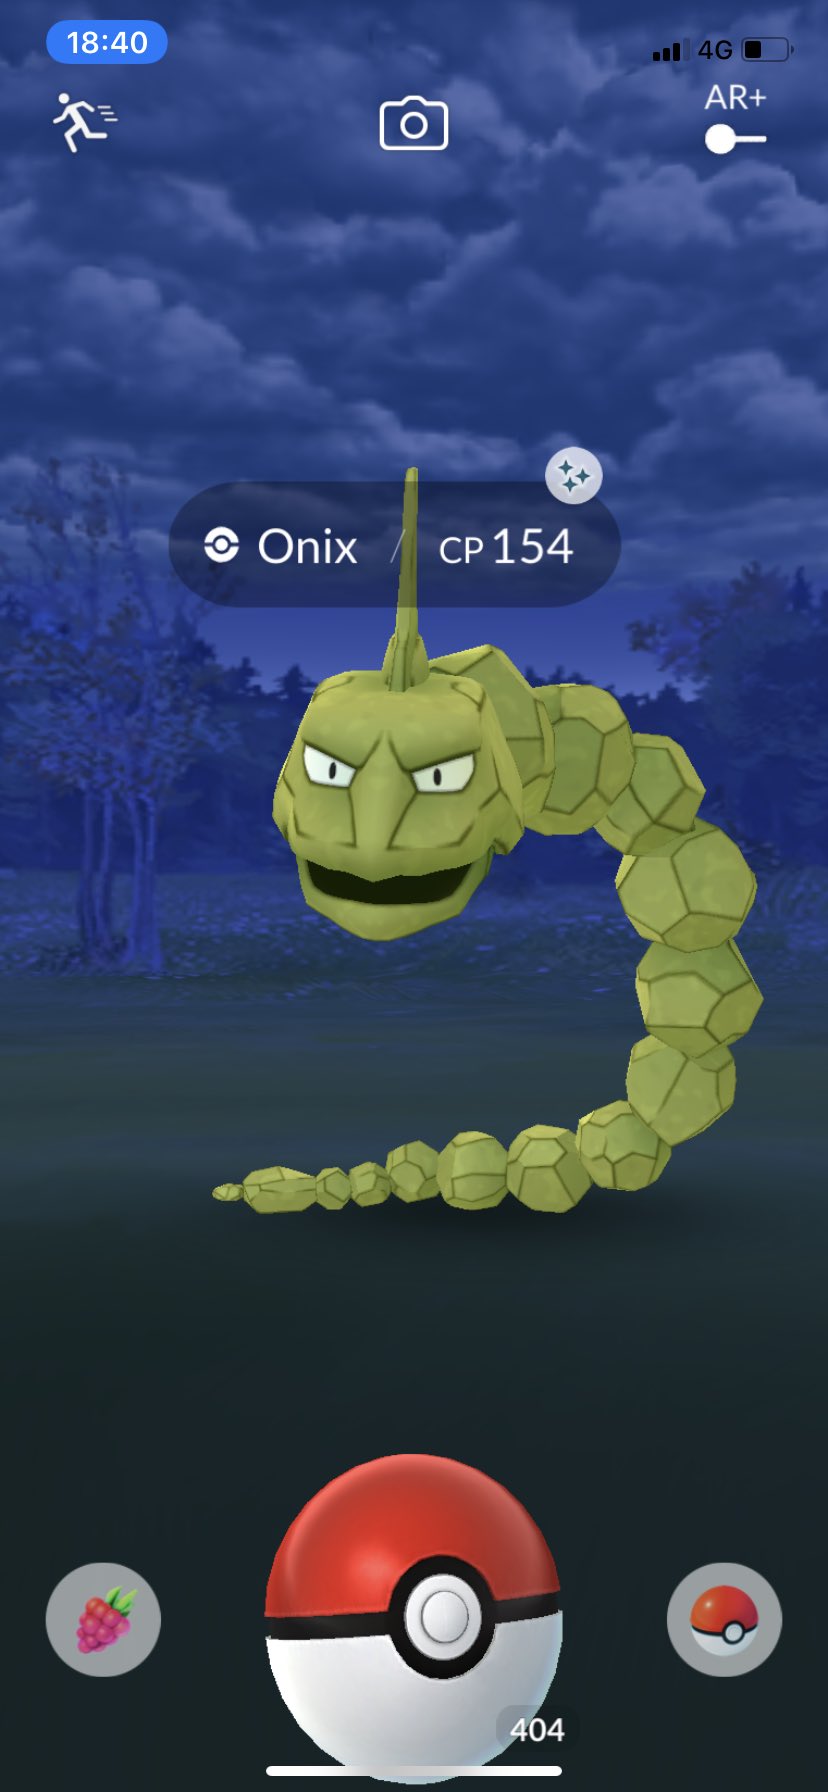 LIVE] Shiny Onix full odds after 6,812 seen